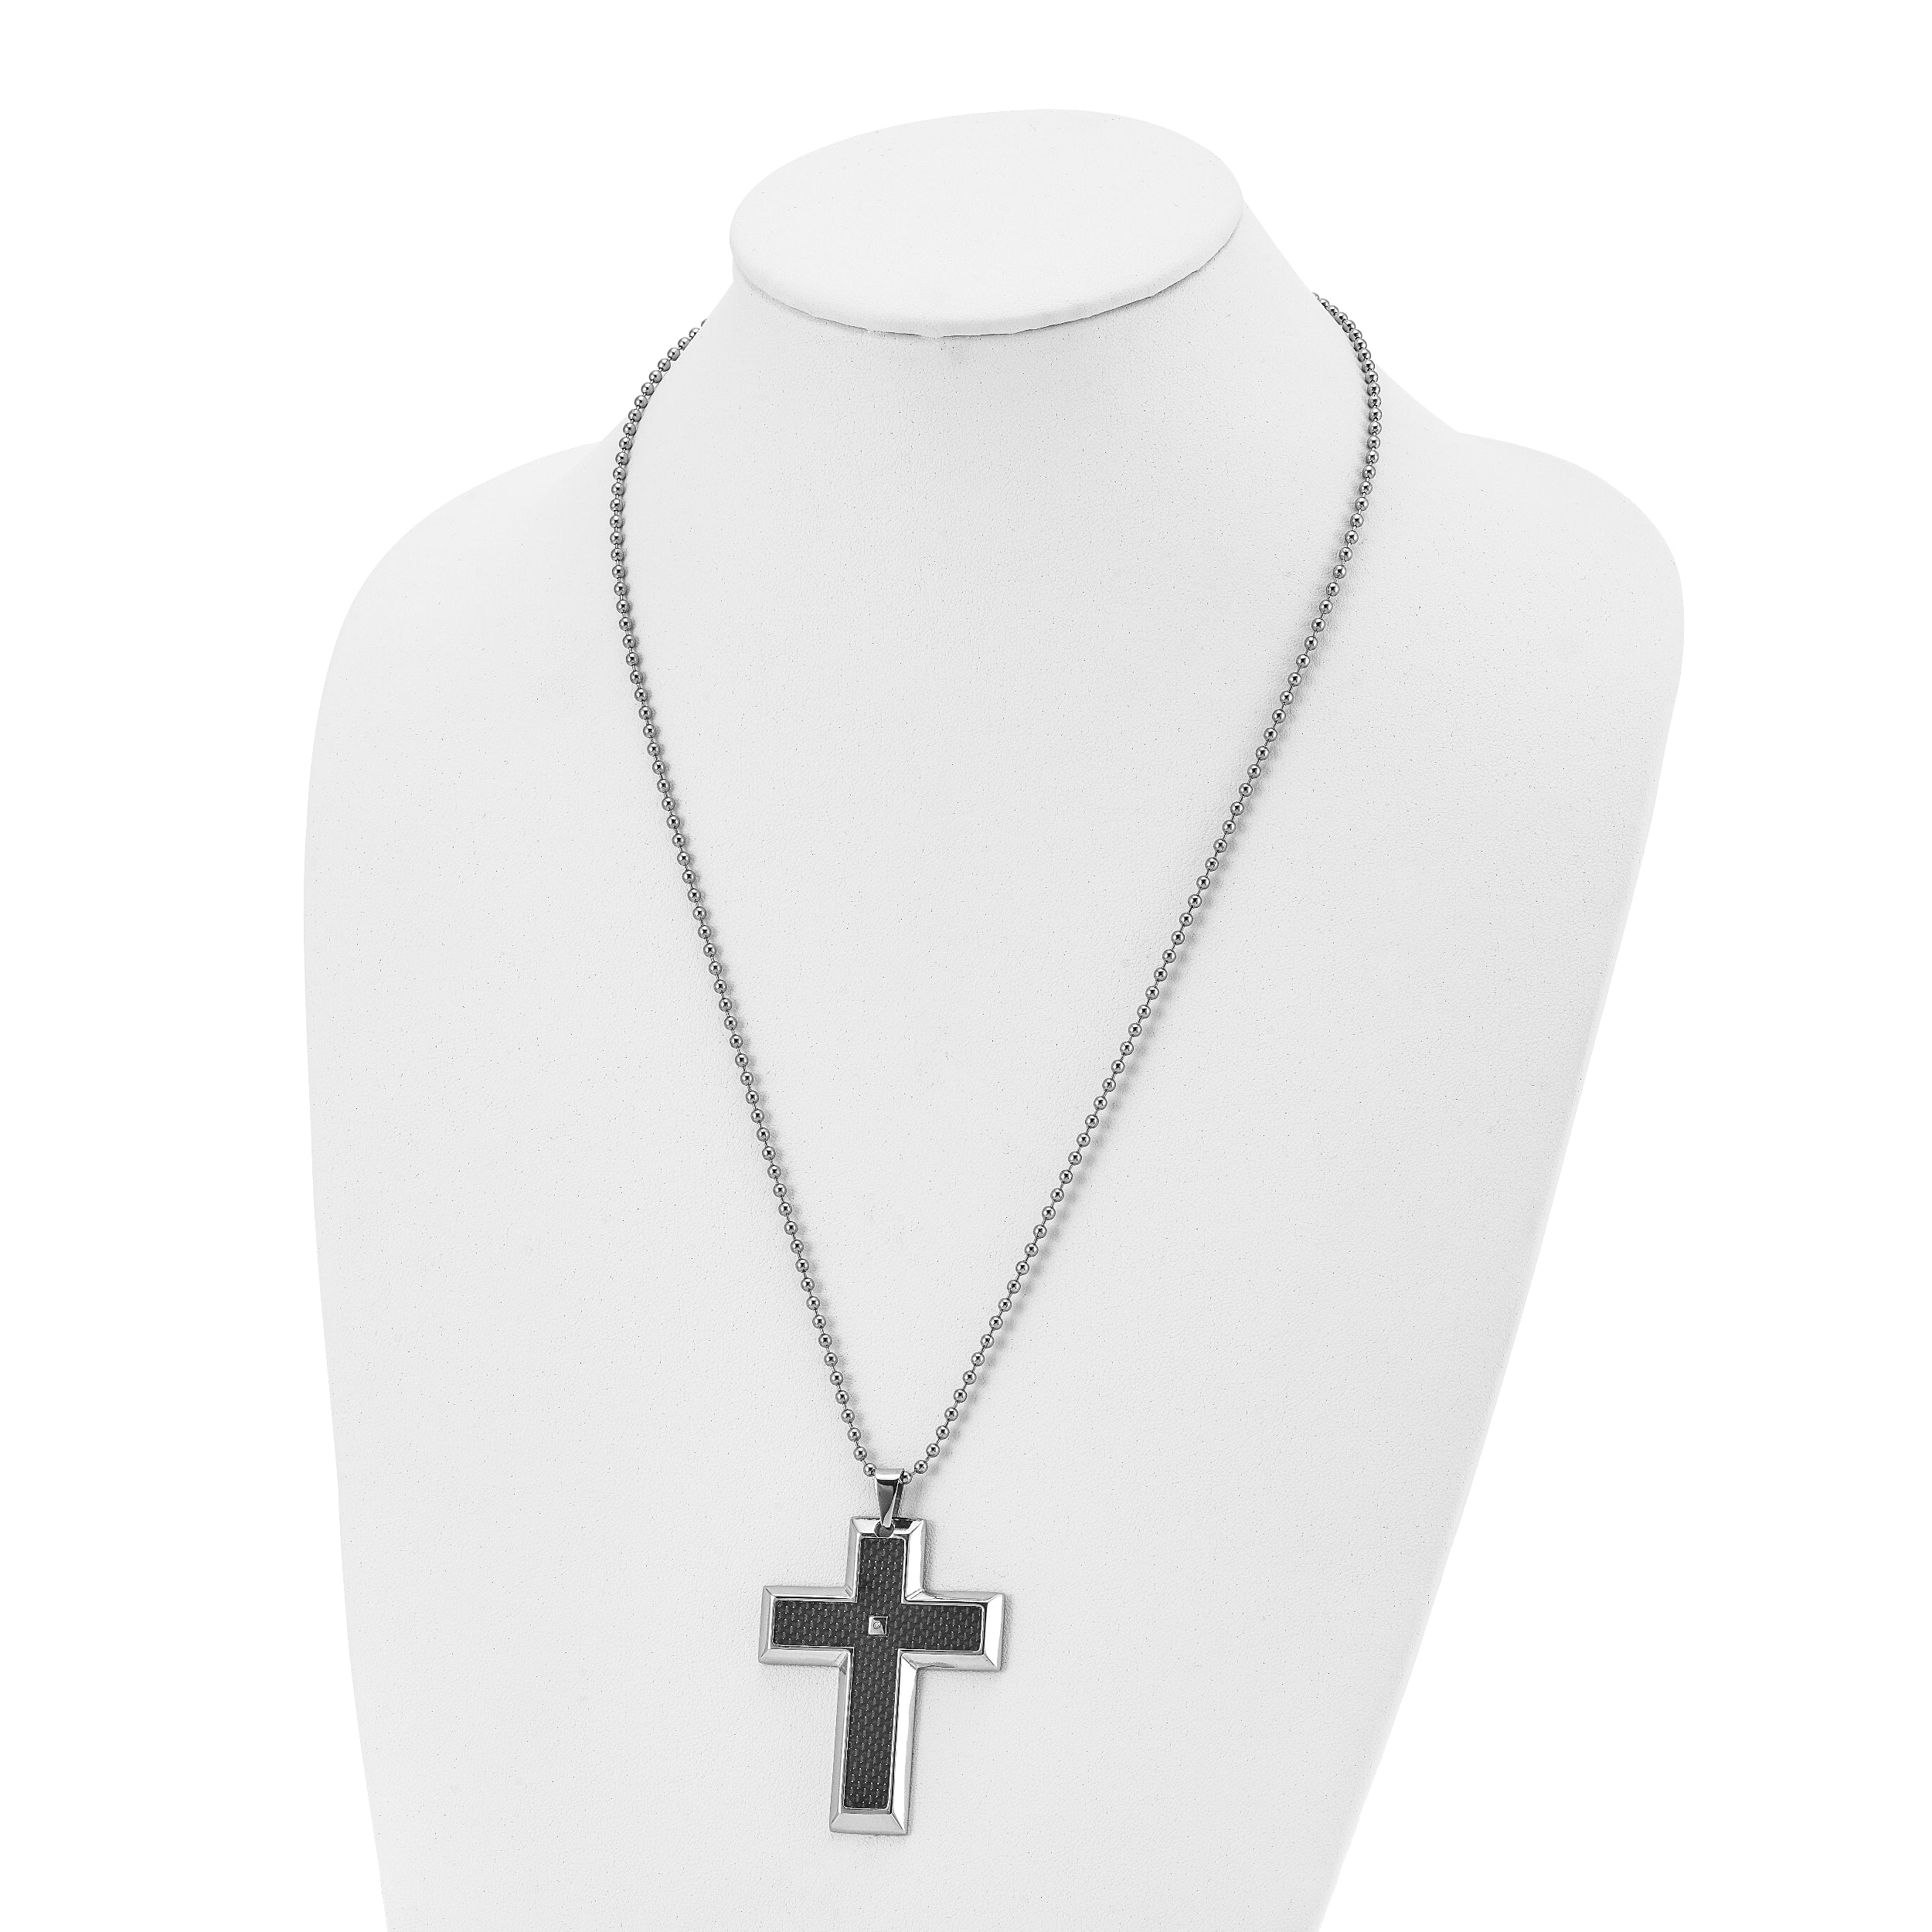 Chisel Stainless Steel Polished with Black Carbon Fiber Inlay .0.1 Carat Diamond Cross Pendant on a 24 inch Ball Chain Necklace